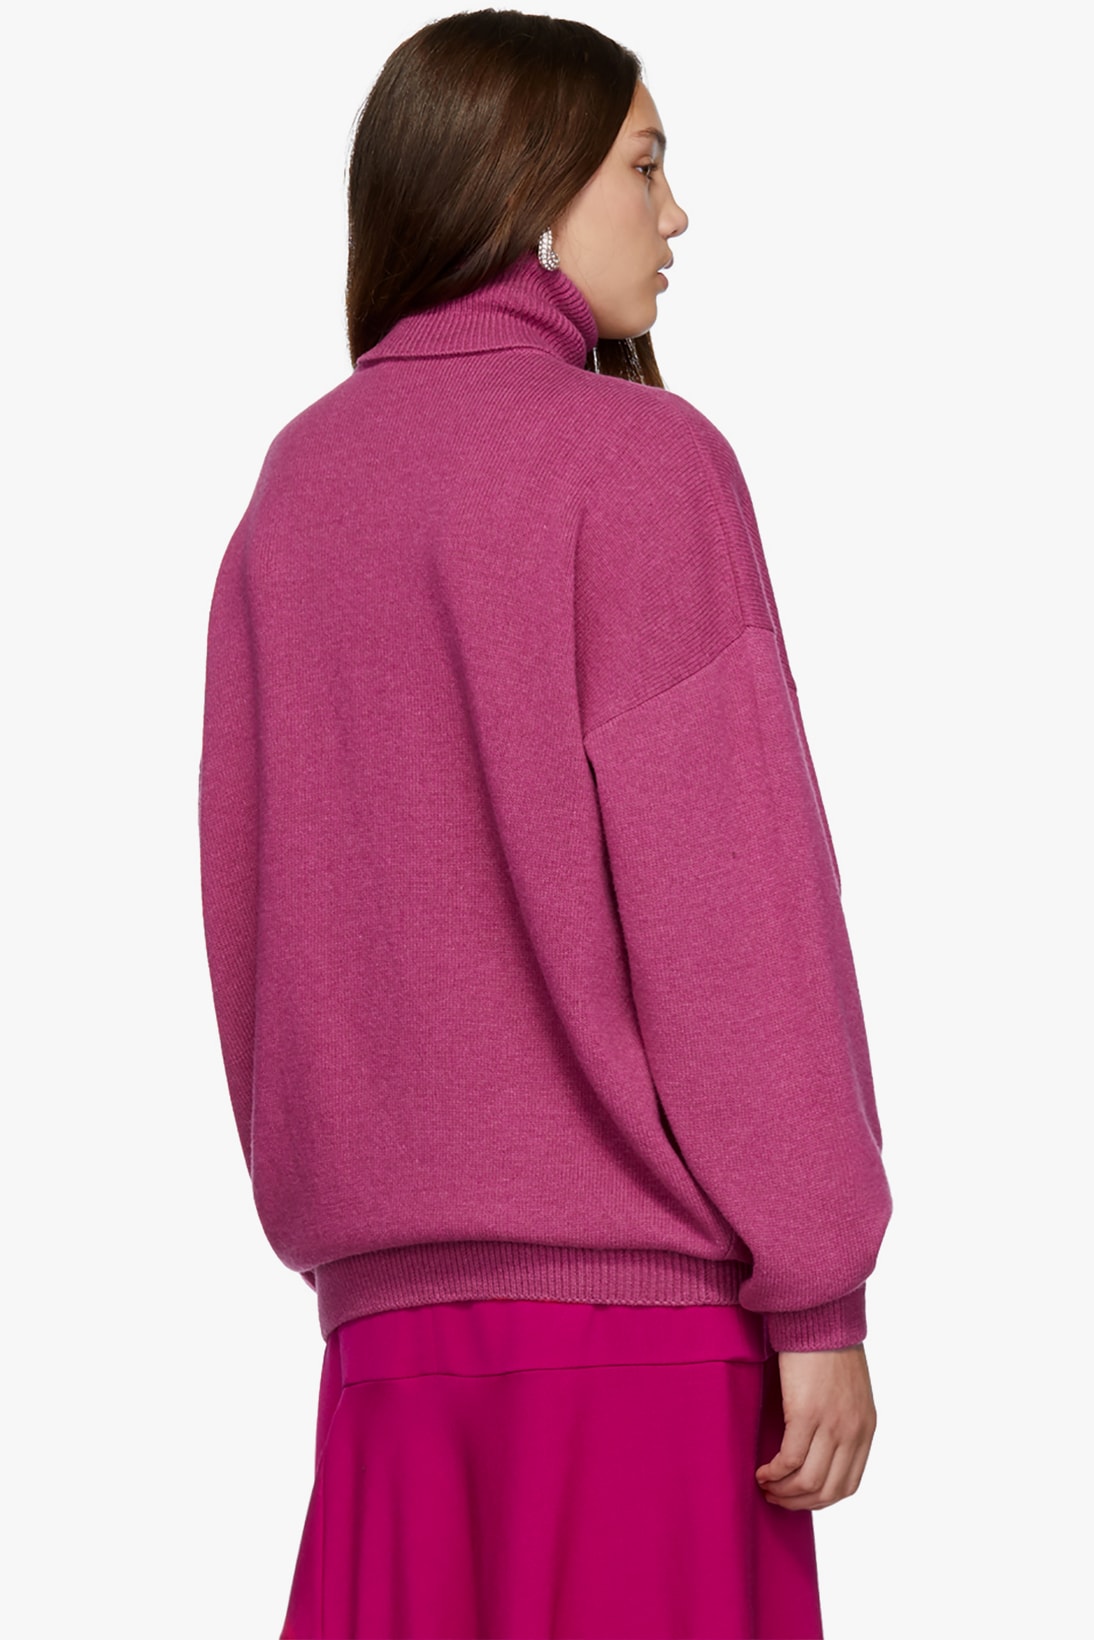 Get Cosy with Balenciaga's Pink Cashmere Turtleneck Hypebae